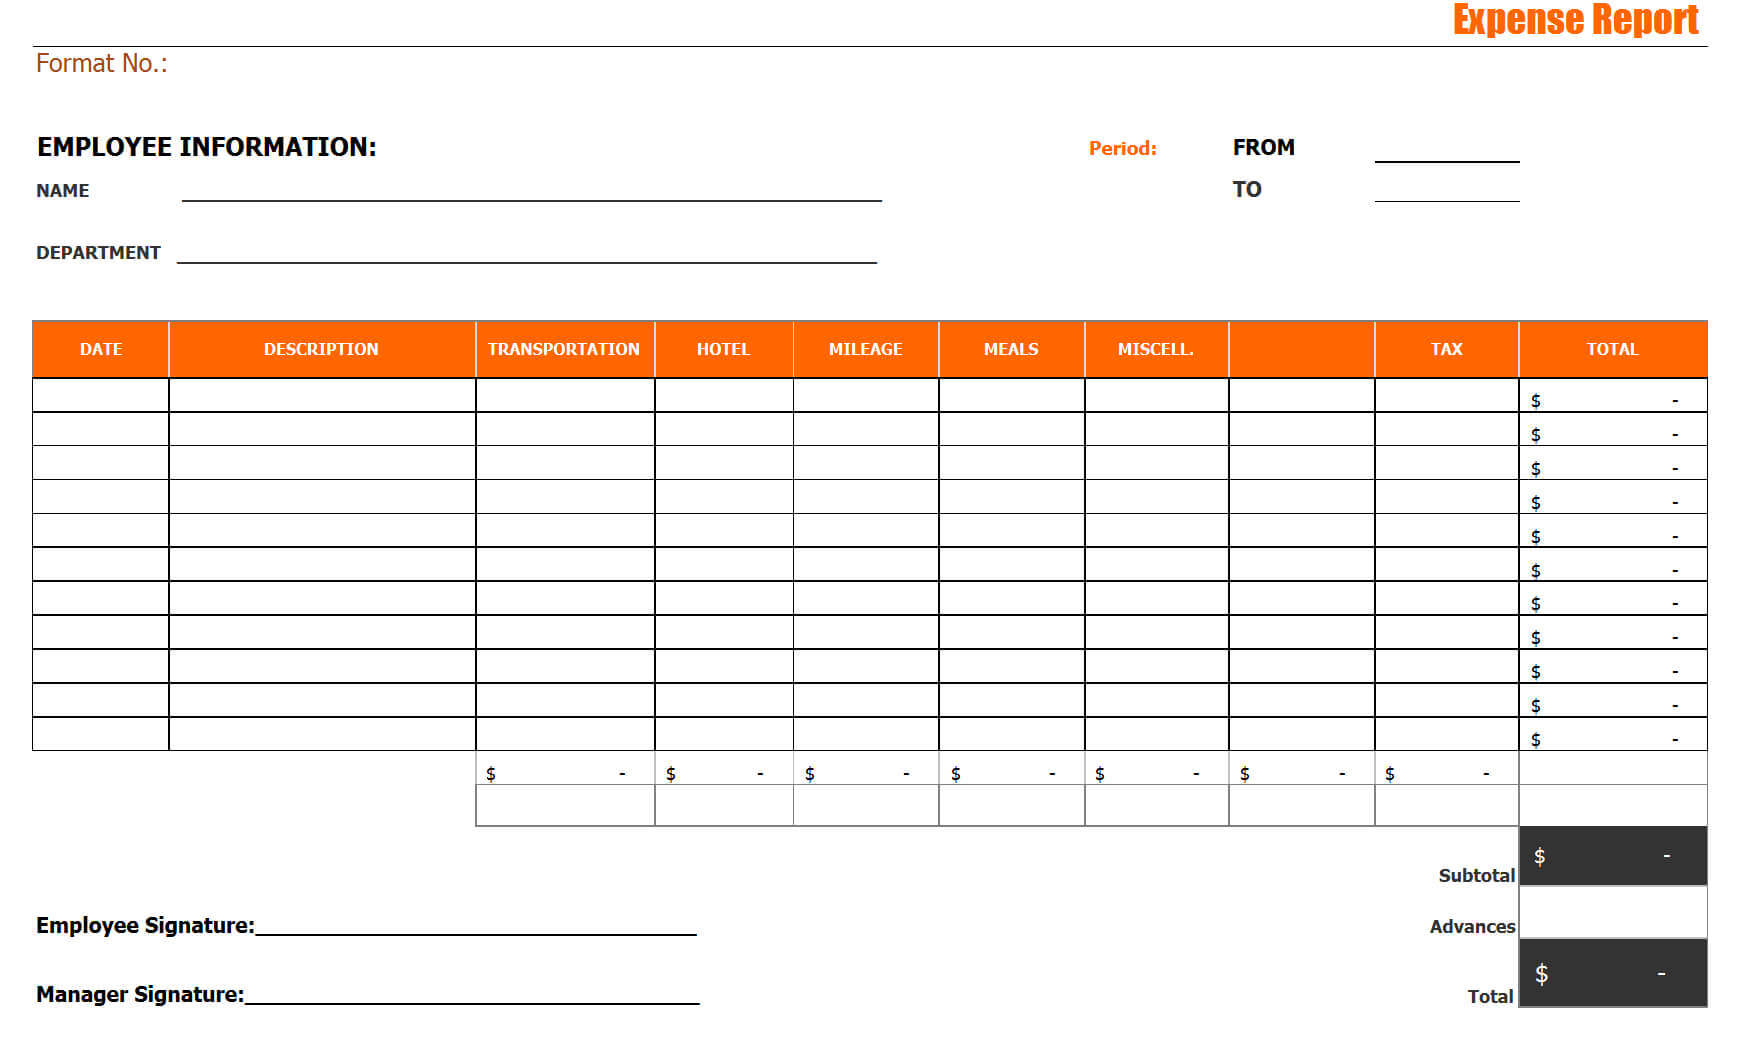 Expense Report – With Regard To Company Expense Report Template